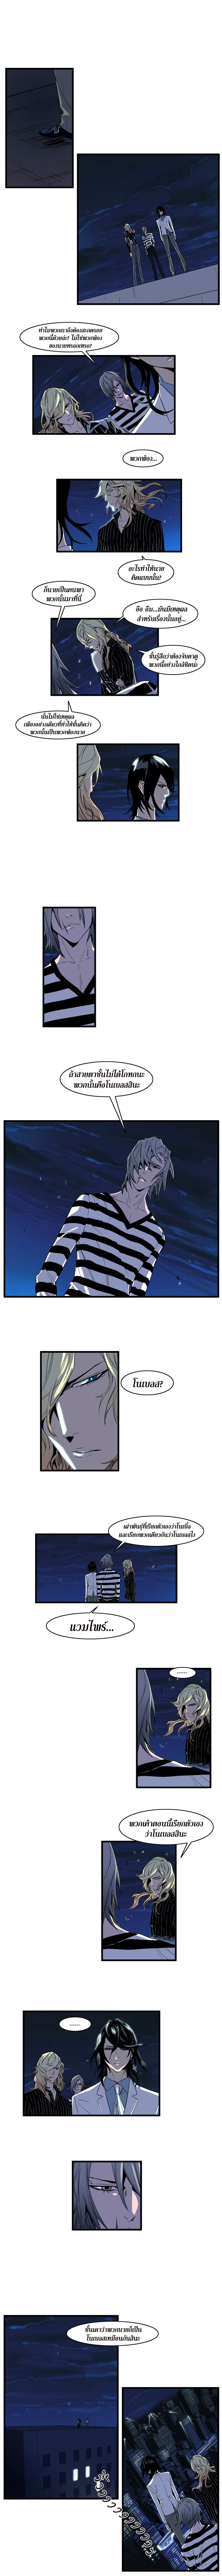 Noblesse 101 003